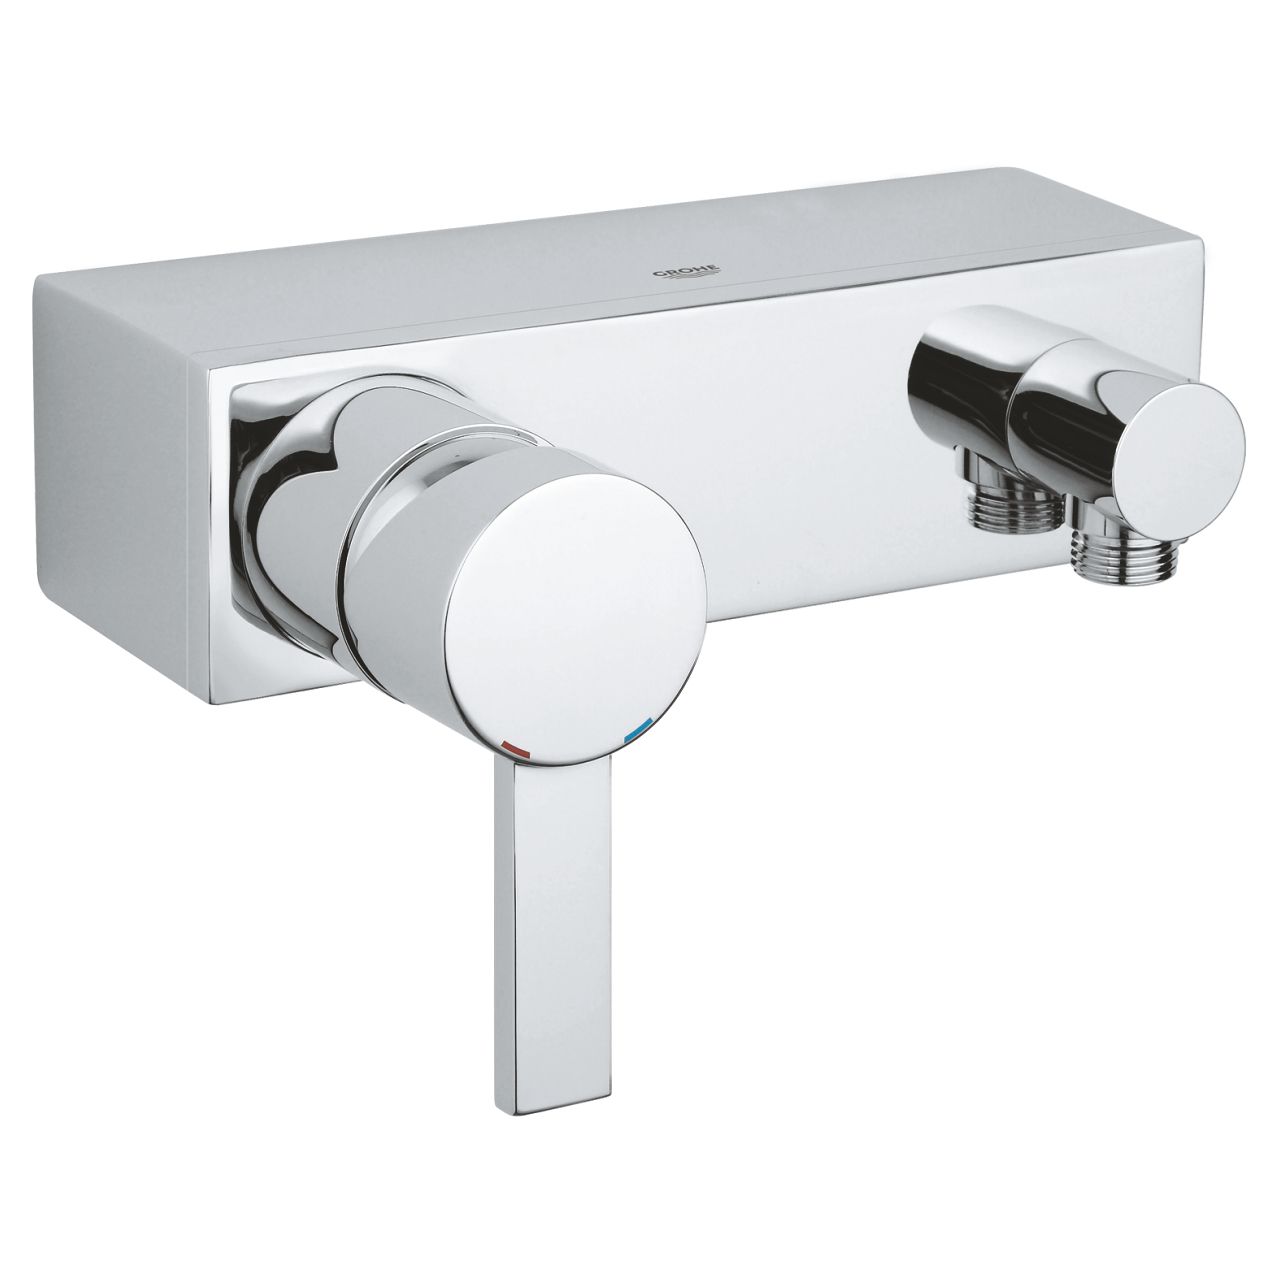  Grohe Allure single-lever shower mixer - 32846000 